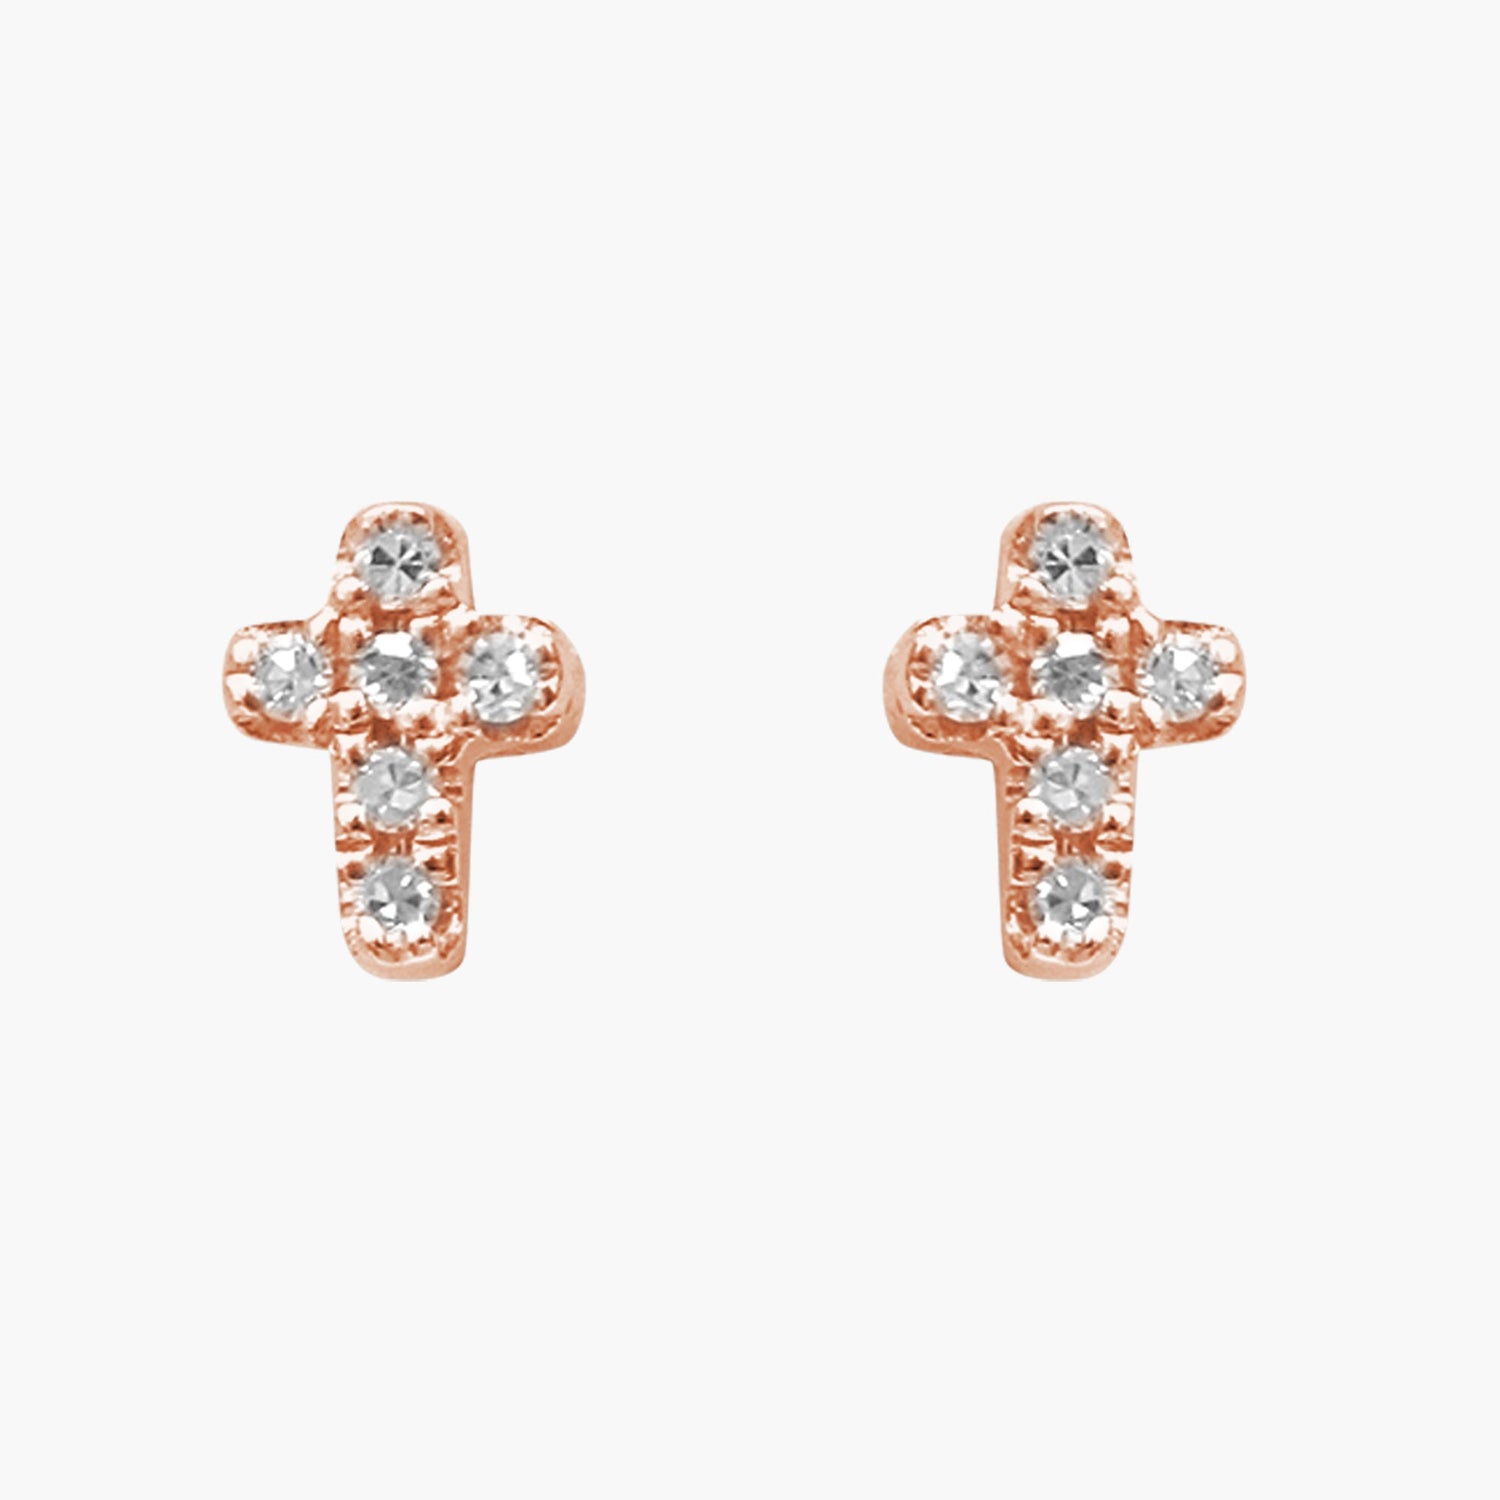 Buy LAVLA Silver/Gold Cross Hoop Earrings - 14K Gold Plated Cubic Zirconia  Pave Small Hoop Earrings With Dangle Cross for Women Men (Gold/Clear Cz) at  Amazon.in